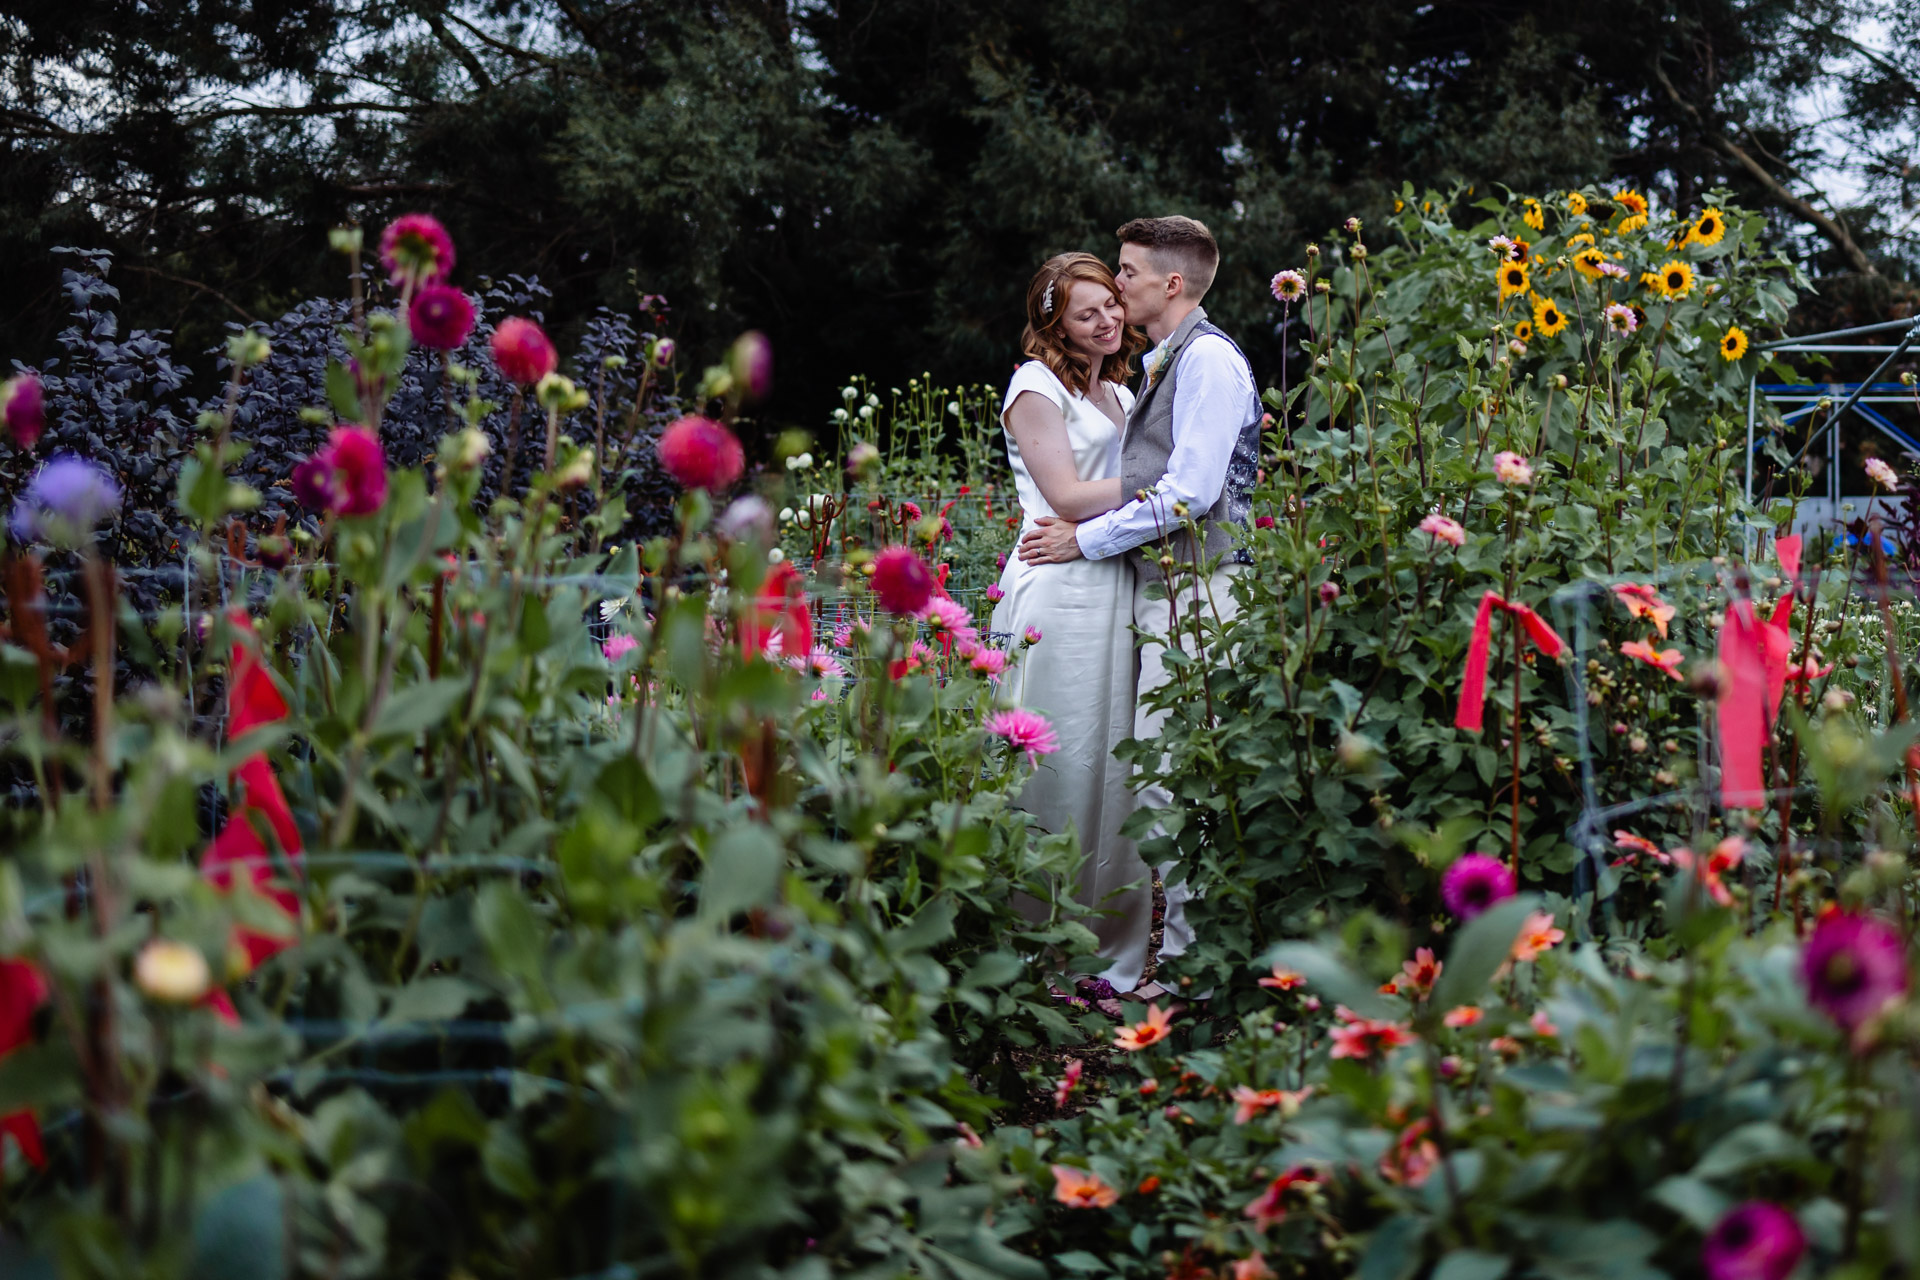 couple having a moment among the flower beds at warborne farm, new forest